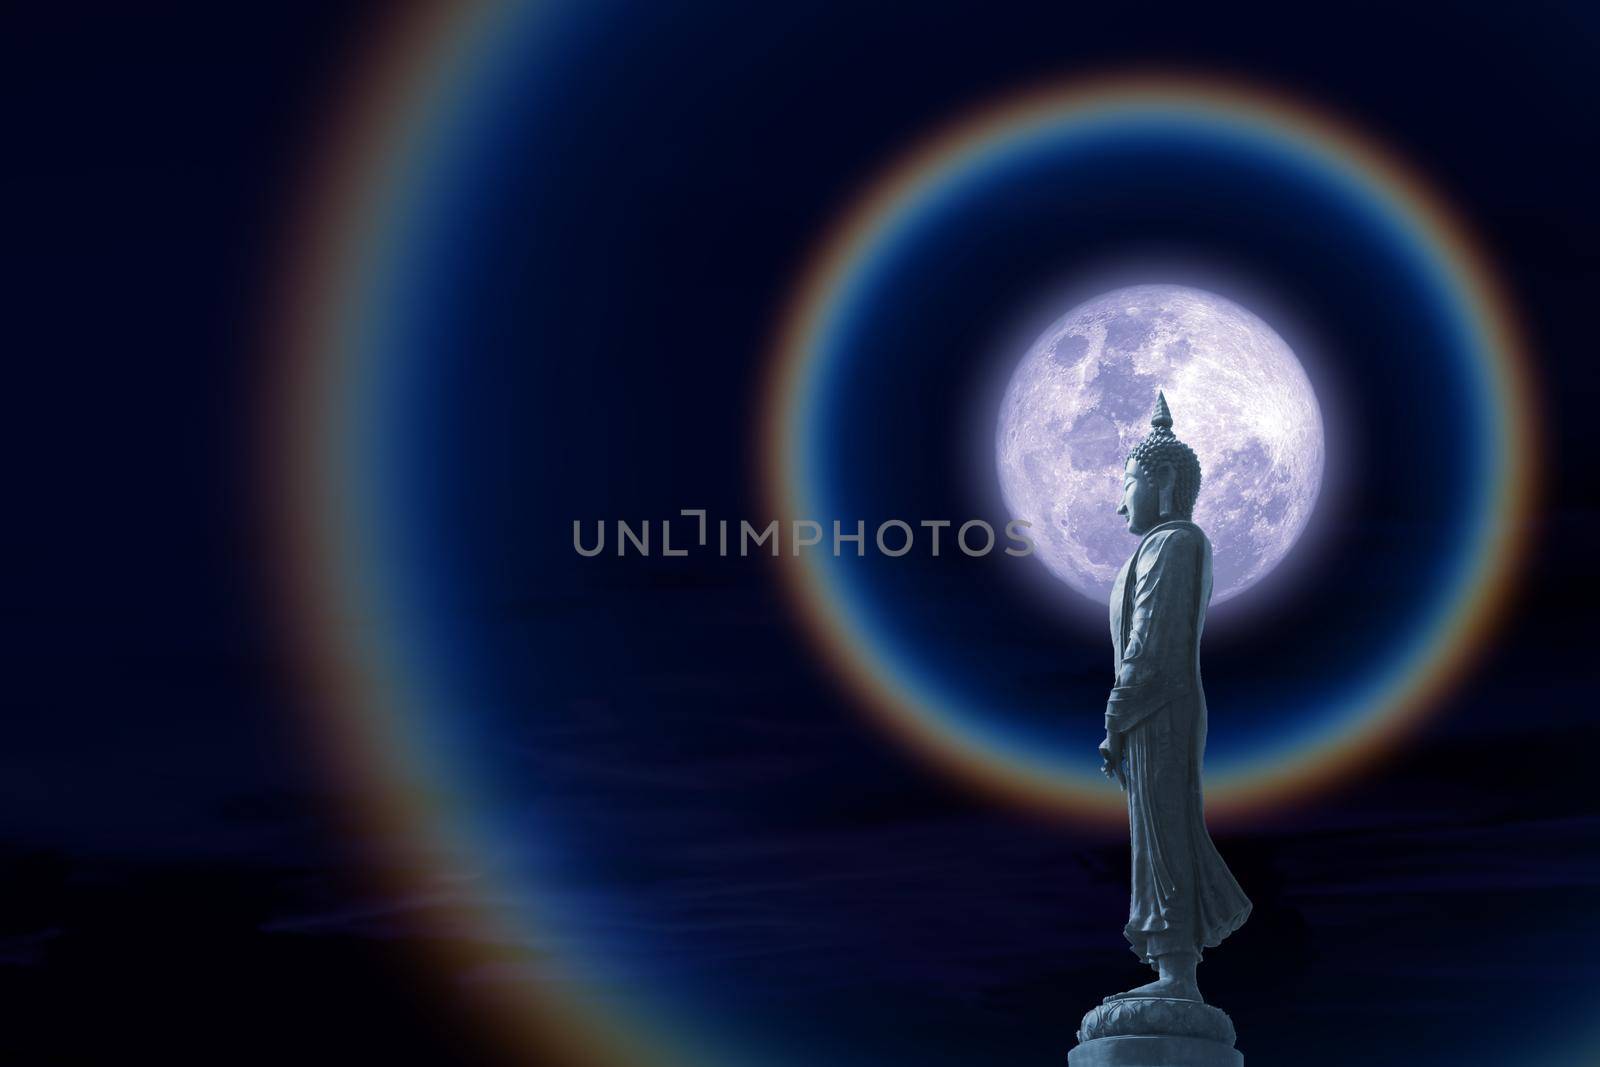 Moon corona light and Buddha looking seven day style on the night sky by Darkfox